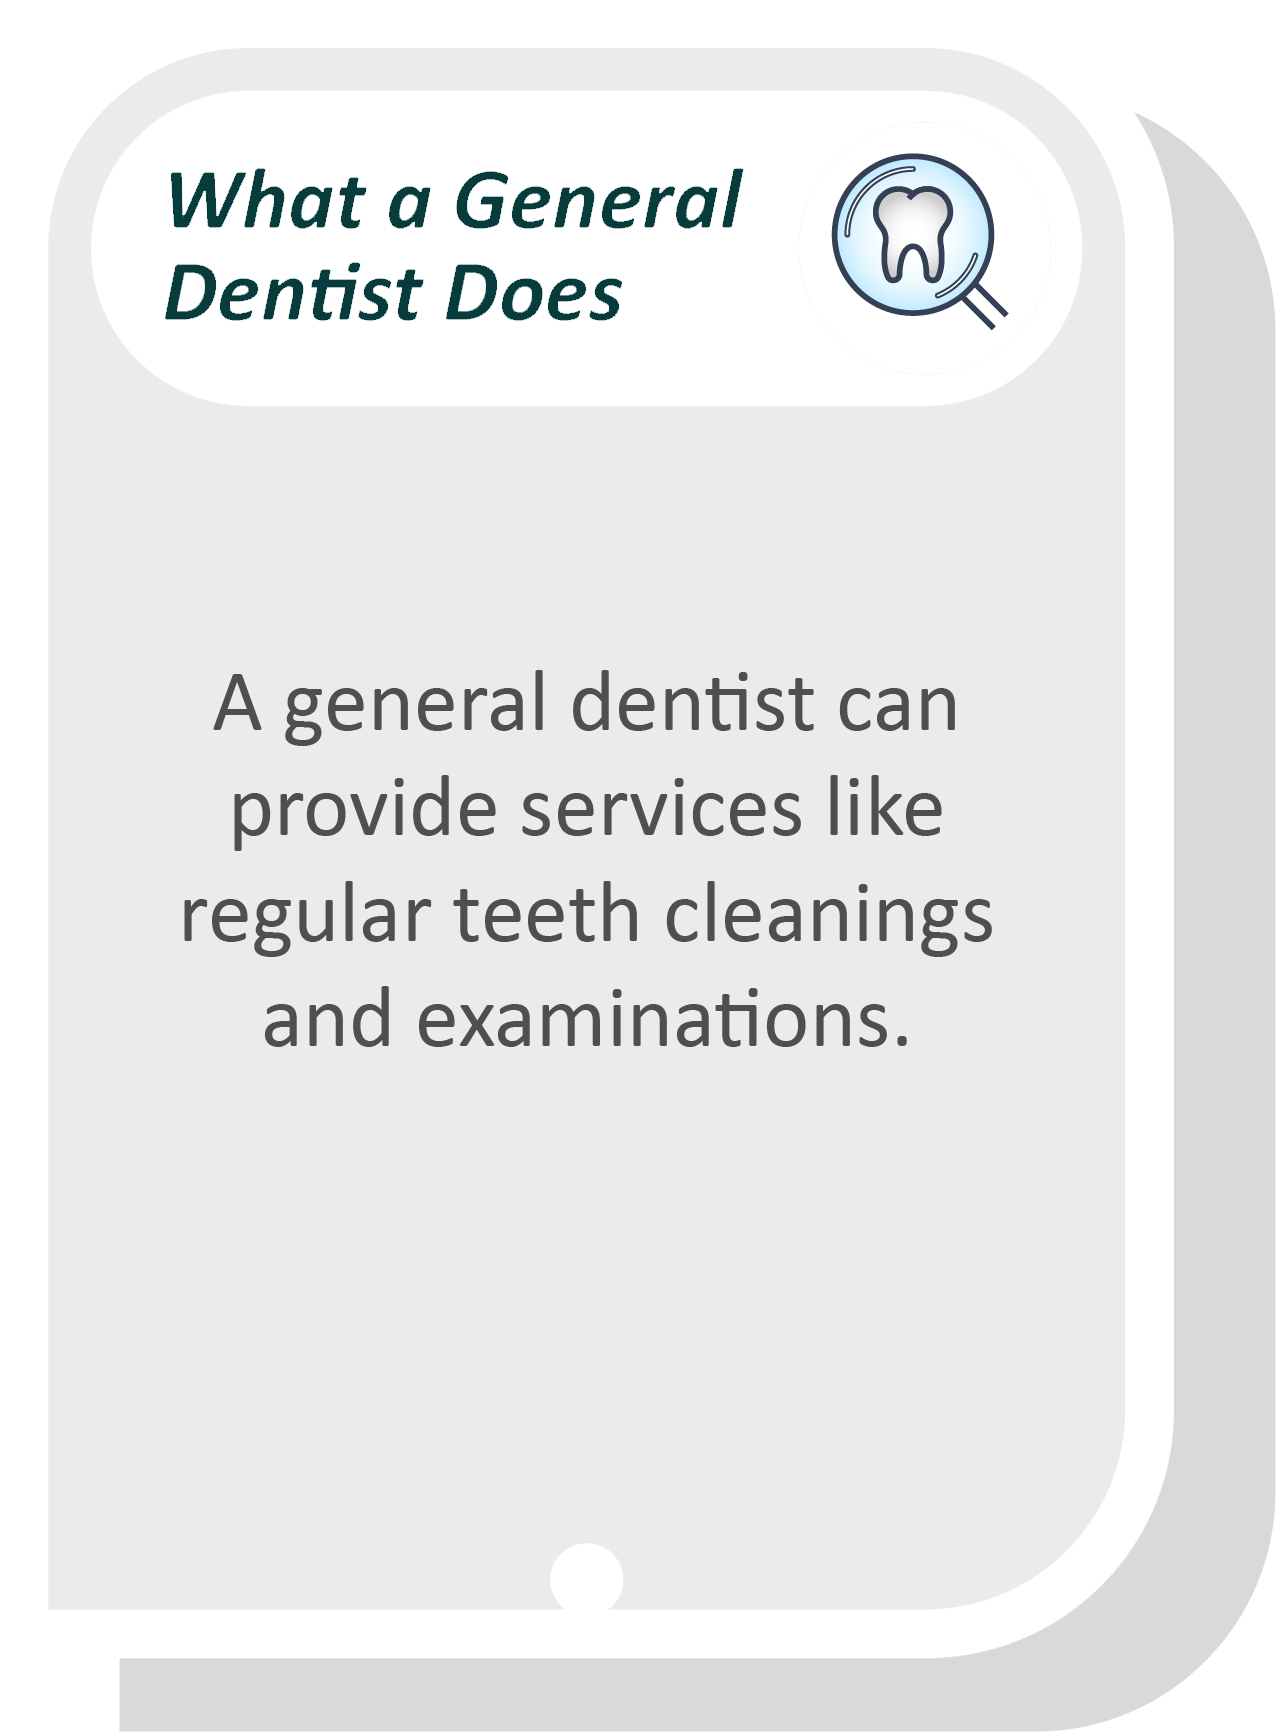 General dentist infographic: A general dentist can provide services like regular teeth cleanings and examinations.